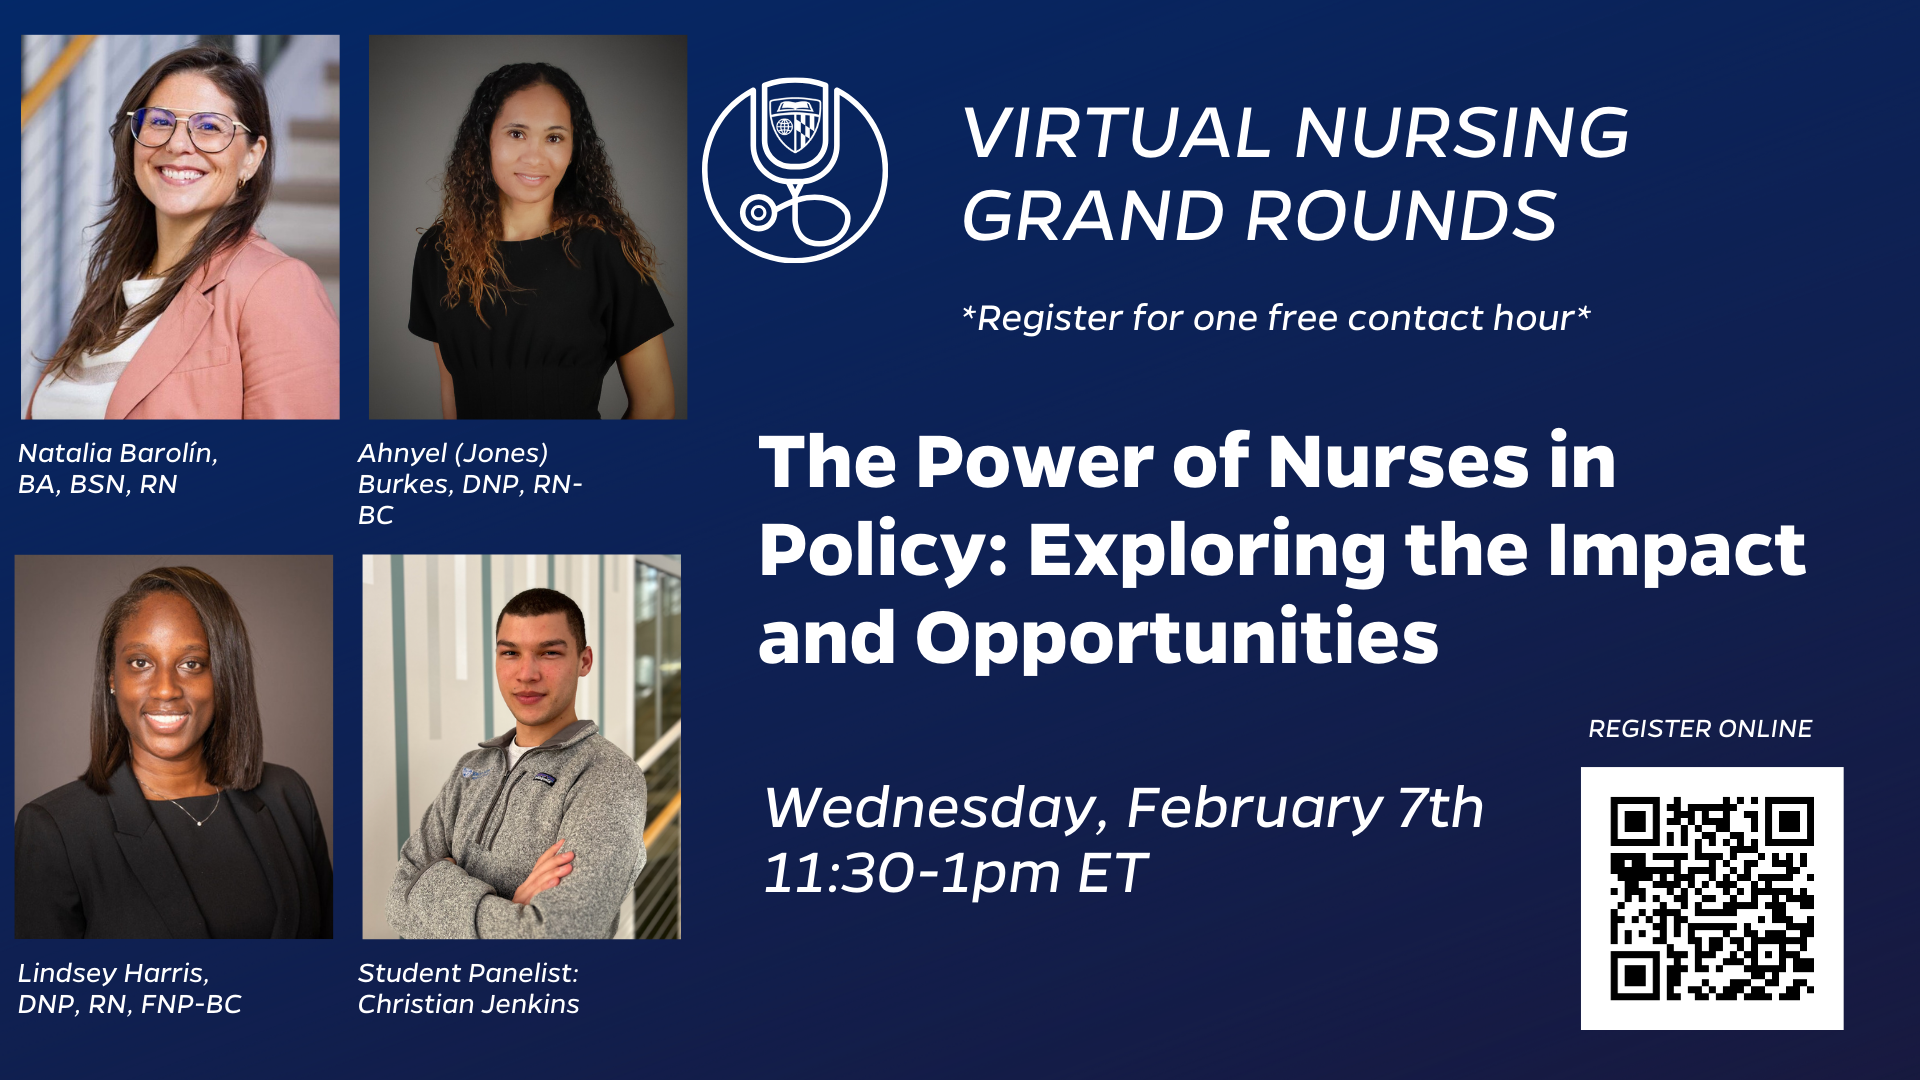 JHSON Virtual Nursing Grand Rounds: The Power of Nurses in Policy: Exploring the Impact and Opportunities